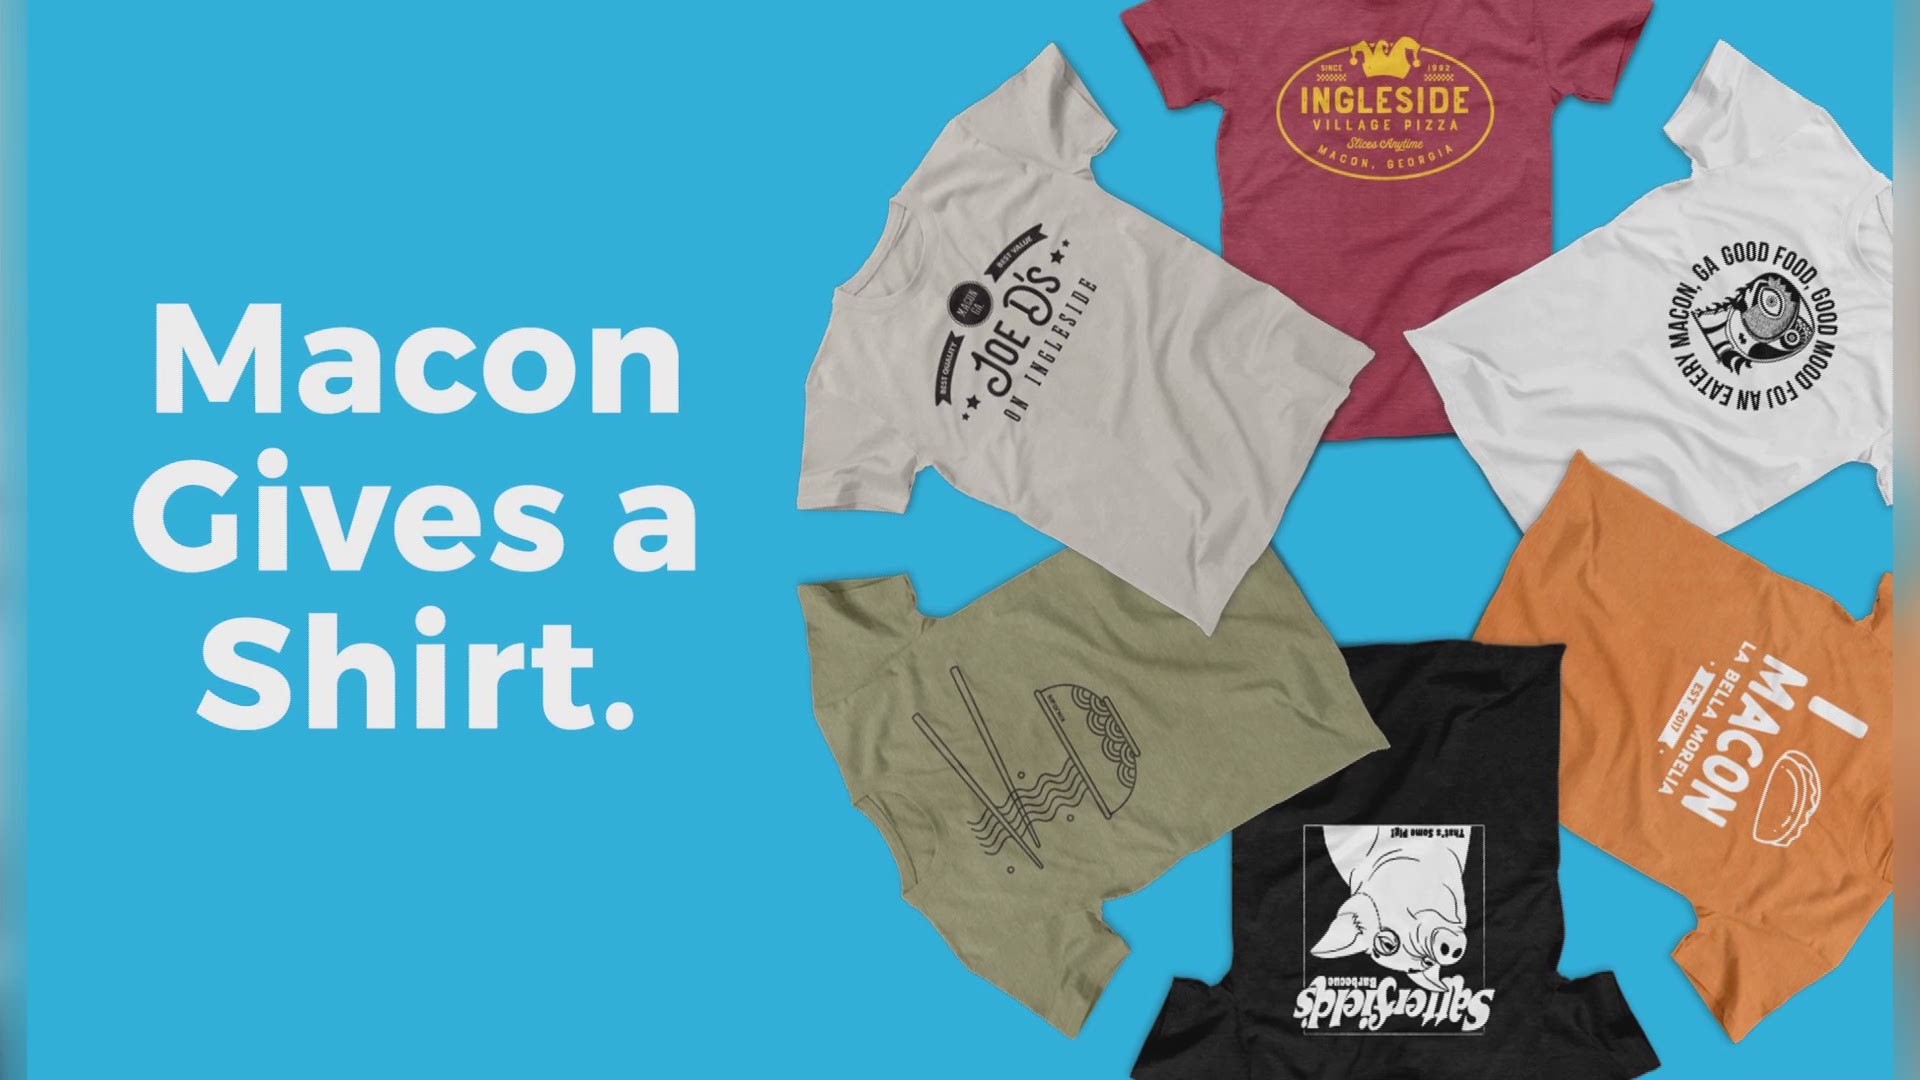 Macon Shirts for Good has raised over $20,000 for local businesses, according to founder Matthew Smith.